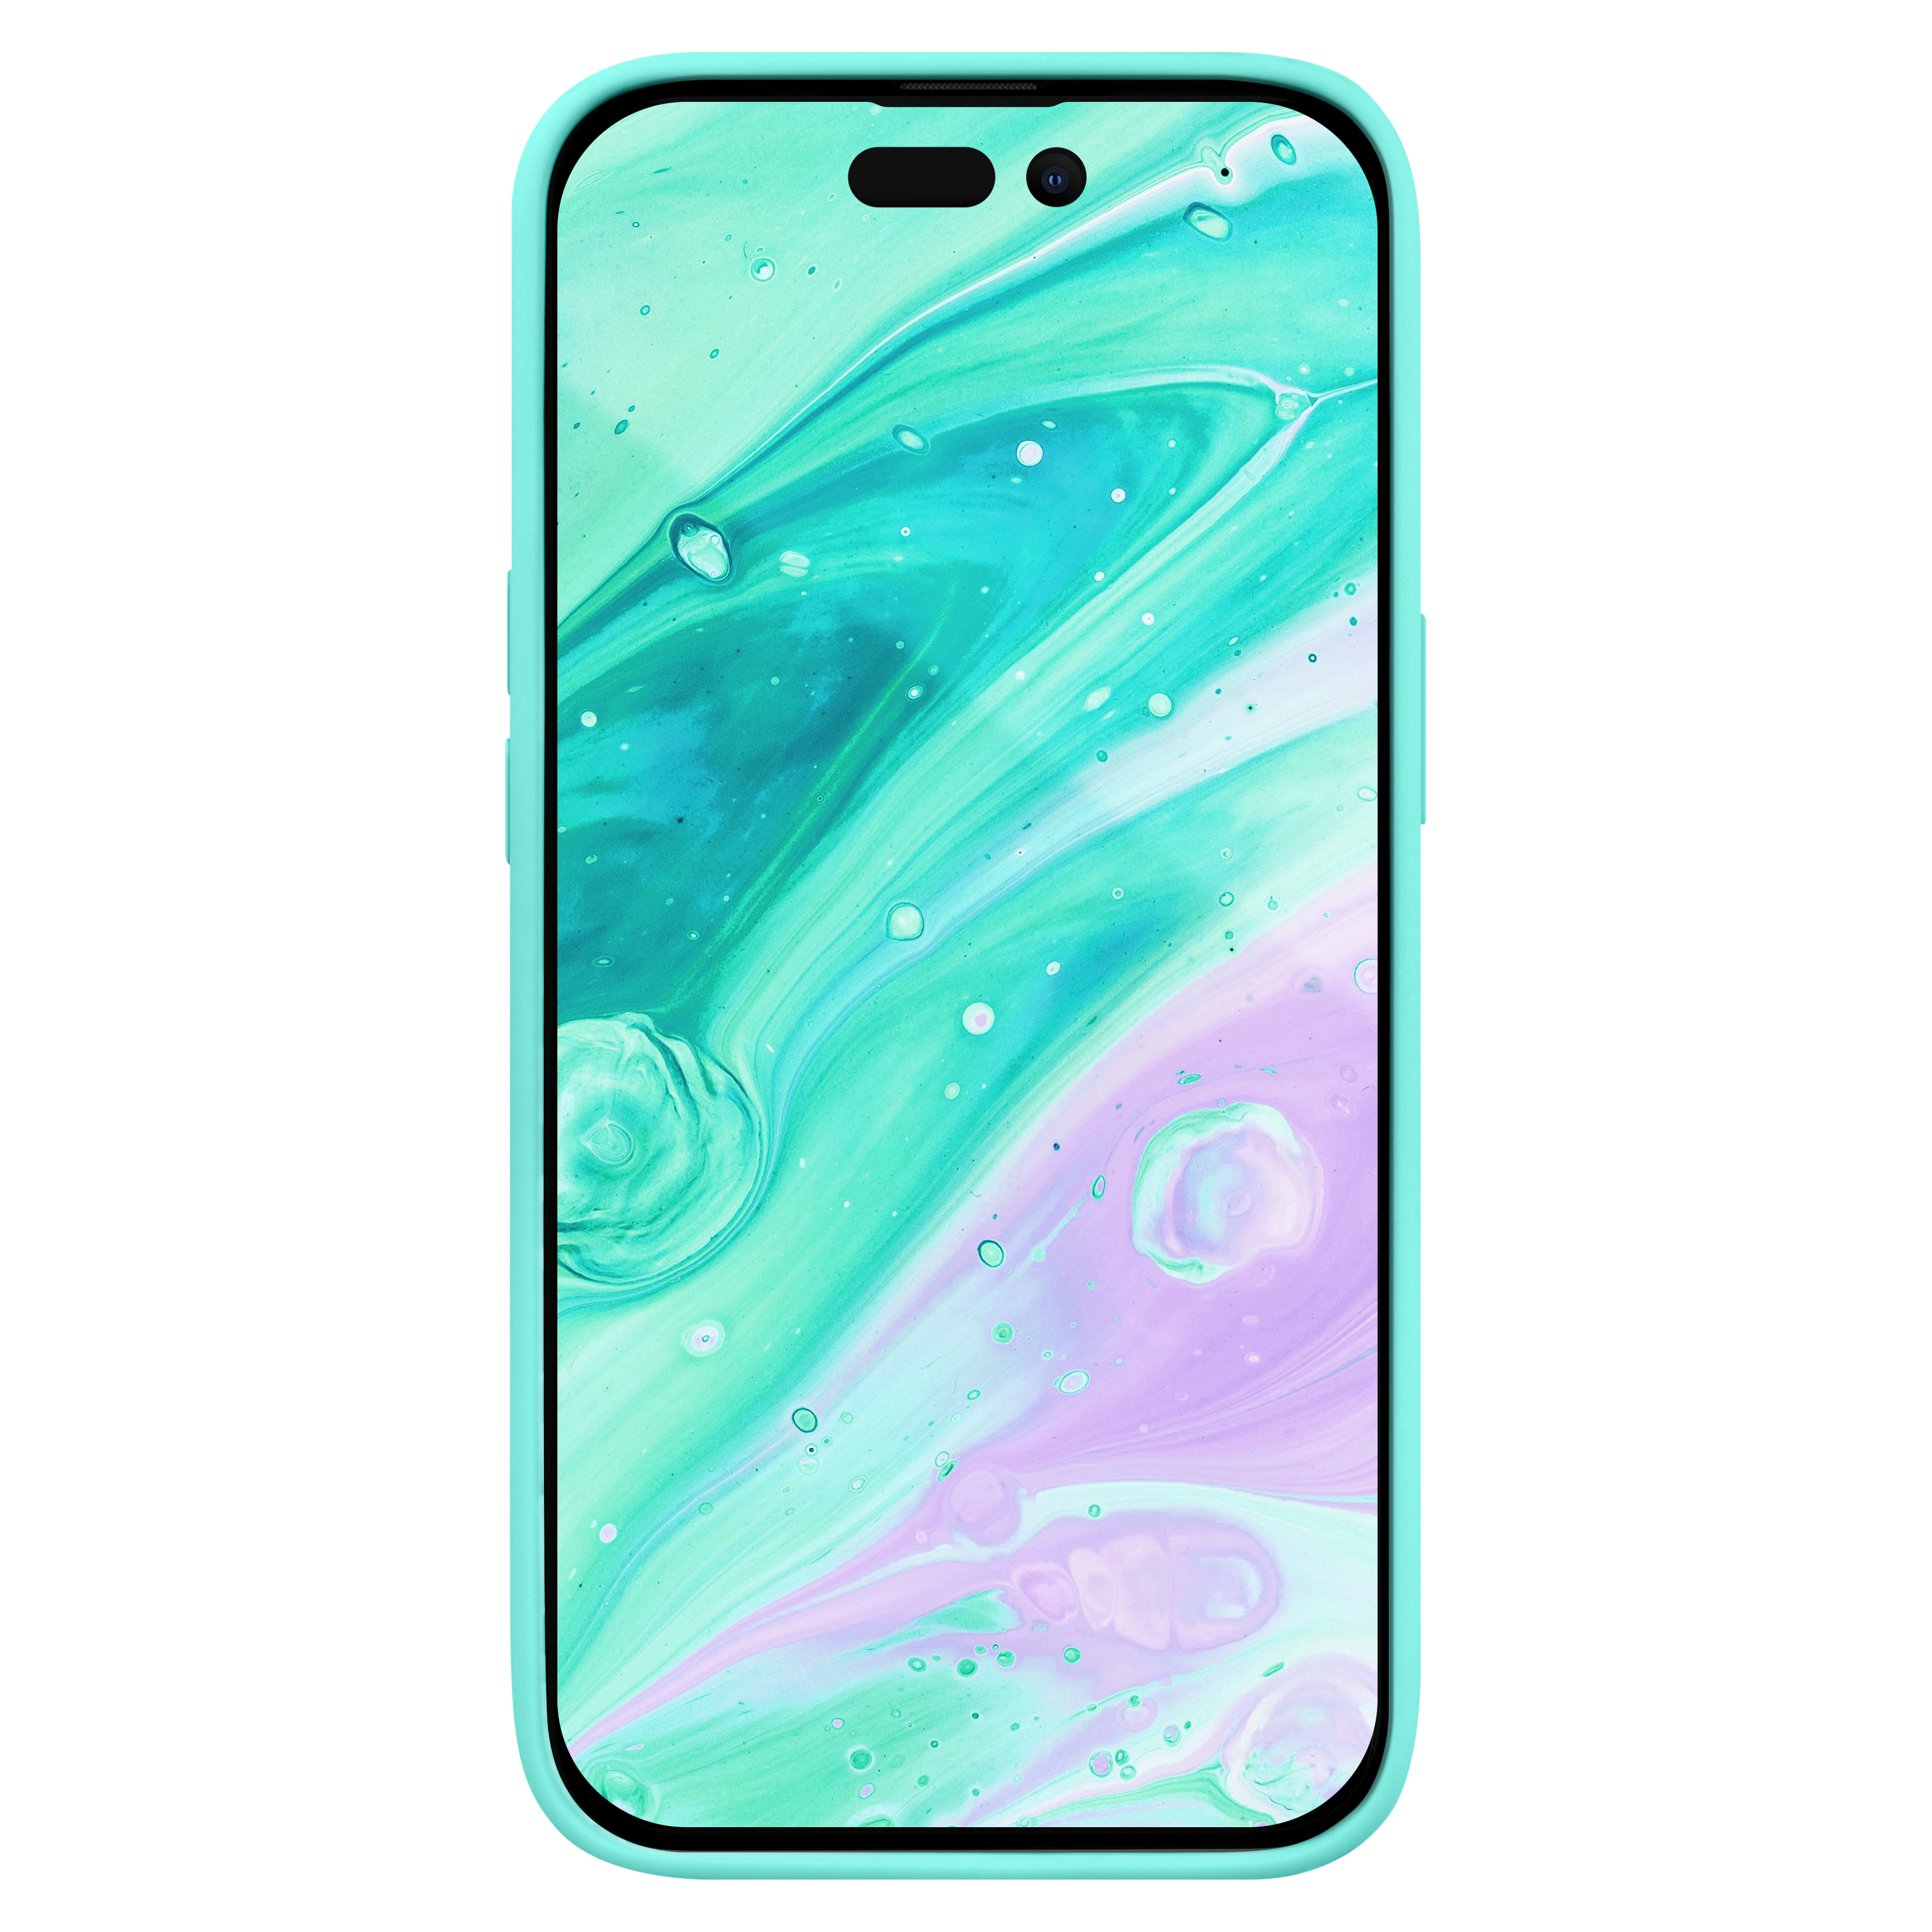 LAUT Pastels, GREEN2 PRO, APPLE, IPHONE Huex 14 Backcover,